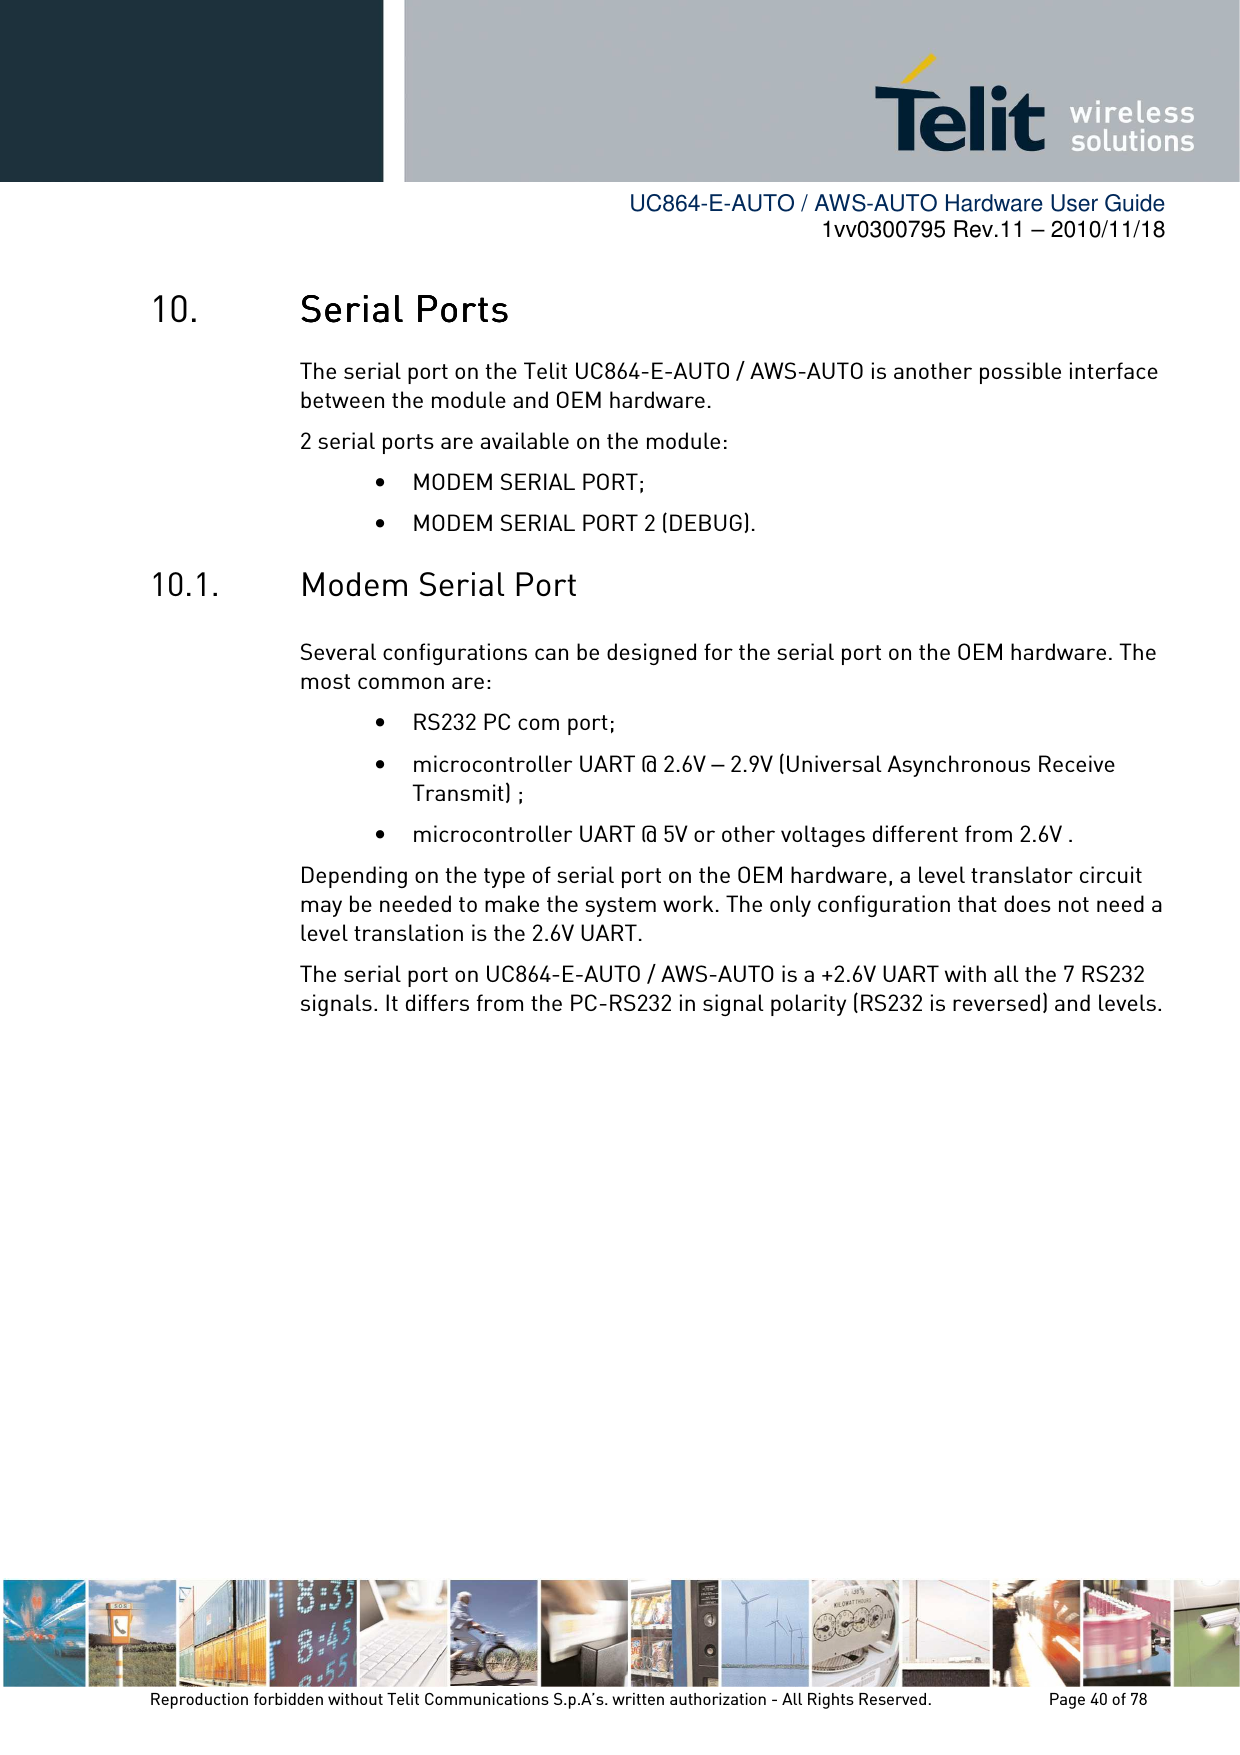        UC864-E-AUTO / AWS-AUTO Hardware User Guide 1vv0300795 Rev.11 – 2010/11/18     Reproduction forbidden without Telit Communications S.p.A’s. written authorization - All Rights Reserved.    Page 40 of 78  10. Serial PortsSerial PortsSerial PortsSerial Ports    The serial port on the Telit UC864-E-AUTO / AWS-AUTO is another possible interface between the module and OEM hardware.  2 serial ports are available on the module: • MODEM SERIAL PORT; • MODEM SERIAL PORT 2 (DEBUG). 10.1. Modem Serial Port Several configurations can be designed for the serial port on the OEM hardware. The most common are: • RS232 PC com port; • microcontroller UART @ 2.6V – 2.9V (Universal Asynchronous Receive Transmit) ; • microcontroller UART @ 5V or other voltages different from 2.6V . Depending on the type of serial port on the OEM hardware, a level translator circuit may be needed to make the system work. The only configuration that does not need a level translation is the 2.6V UART. The serial port on UC864-E-AUTO / AWS-AUTO is a +2.6V UART with all the 7 RS232 signals. It differs from the PC-RS232 in signal polarity (RS232 is reversed) and levels.  